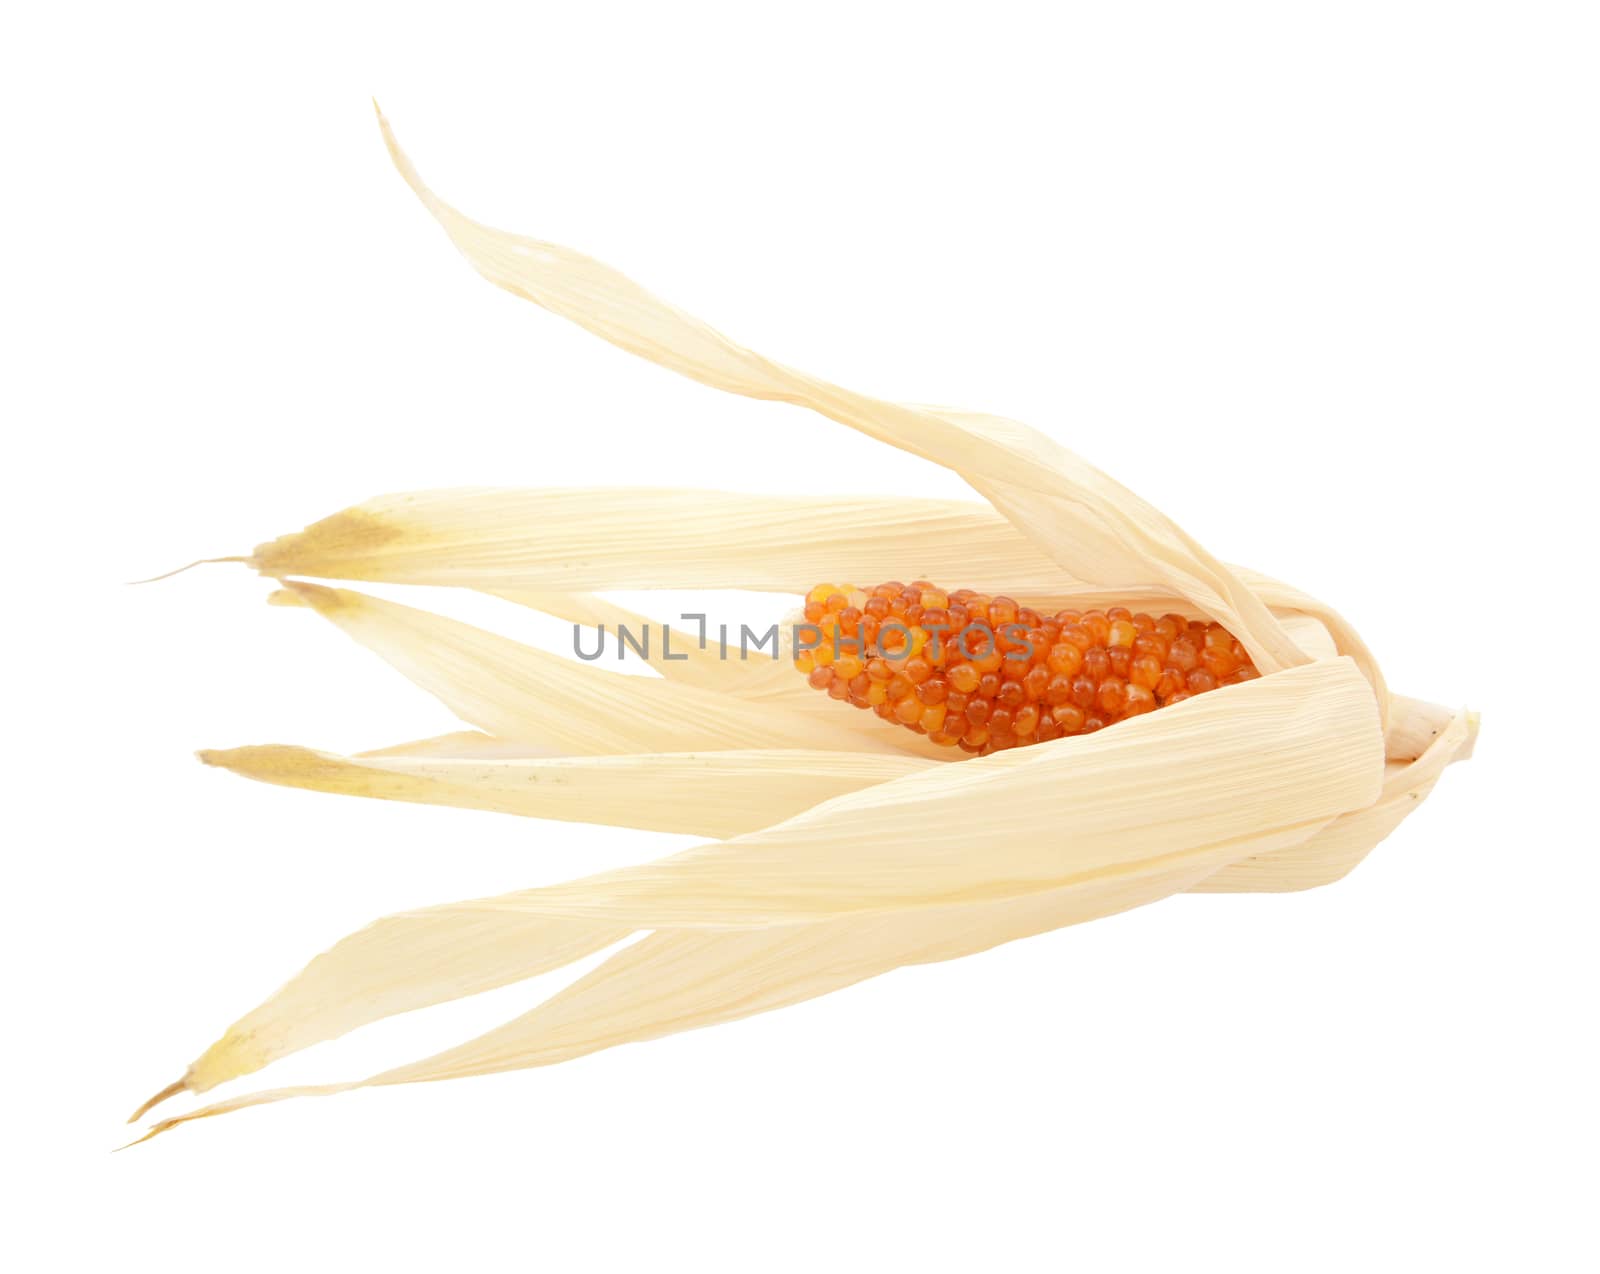 Dried Indian corn with red niblets, surrounded by pale yellow husks on a white background